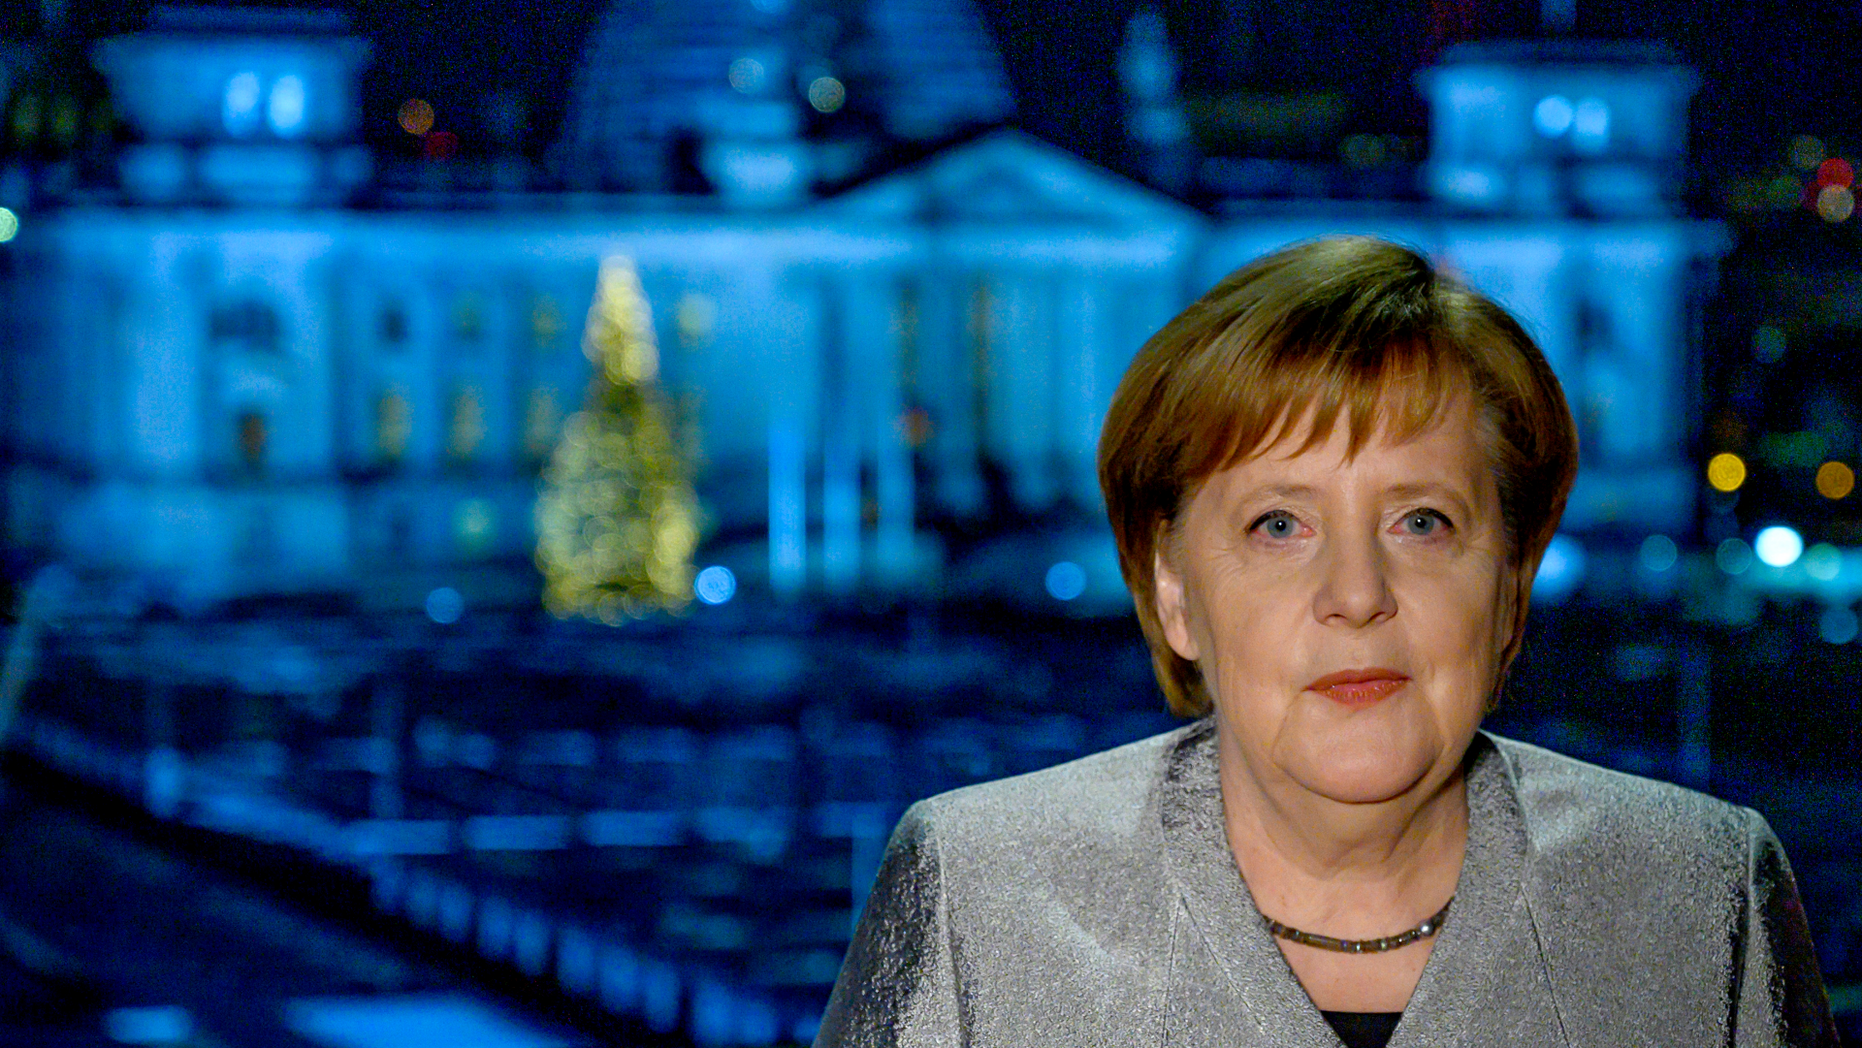 Merkel vows Germany will keep pushing for 